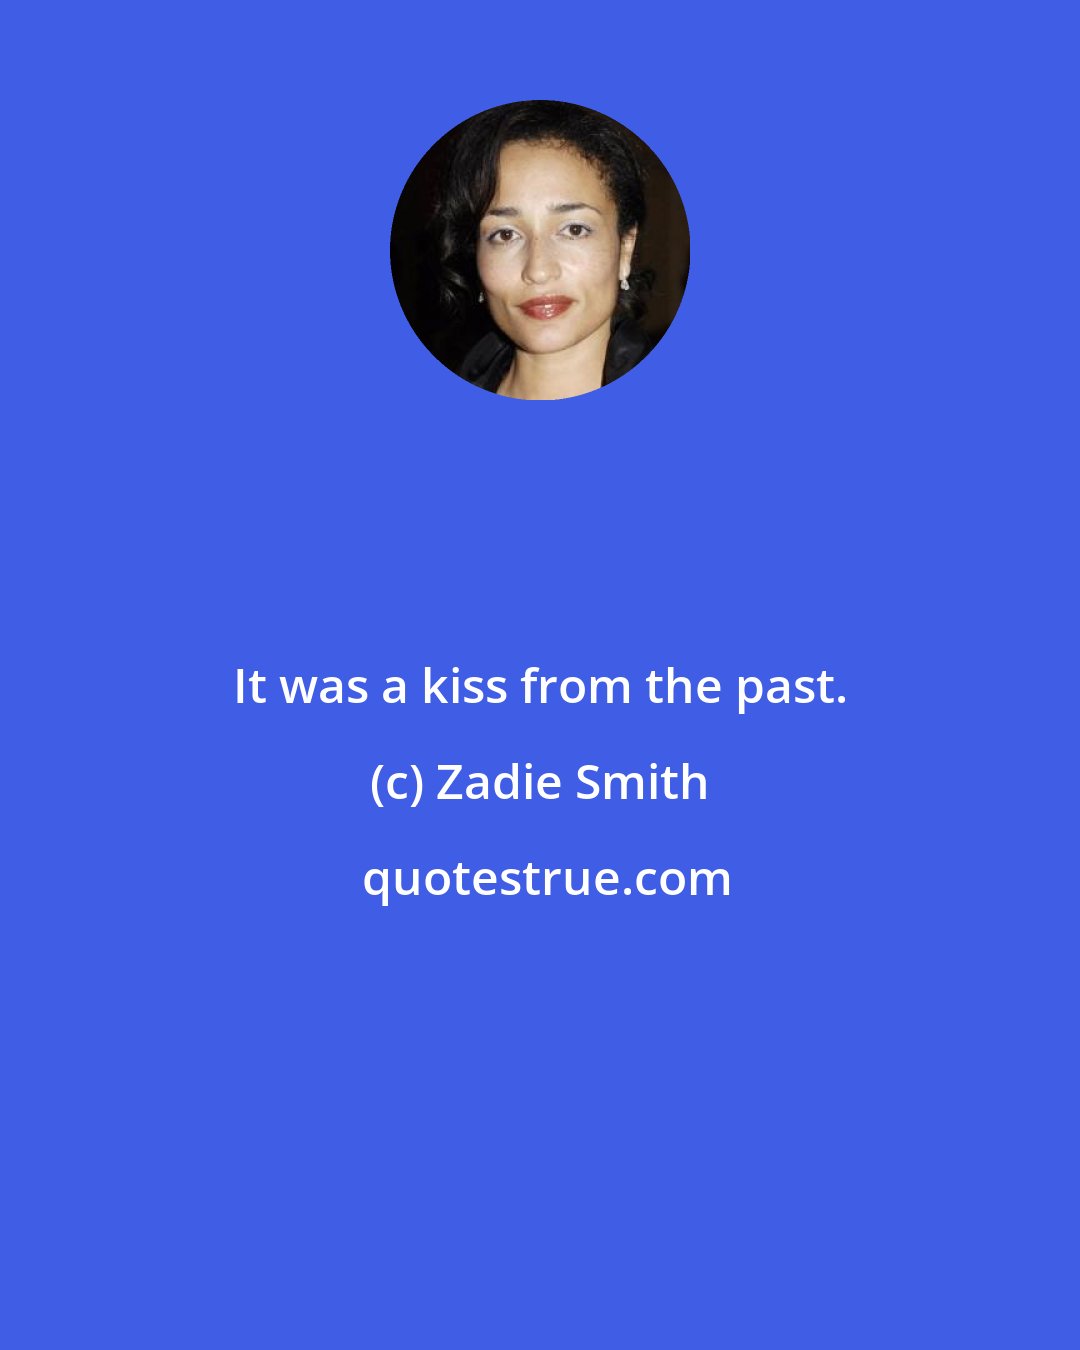 Zadie Smith: It was a kiss from the past.